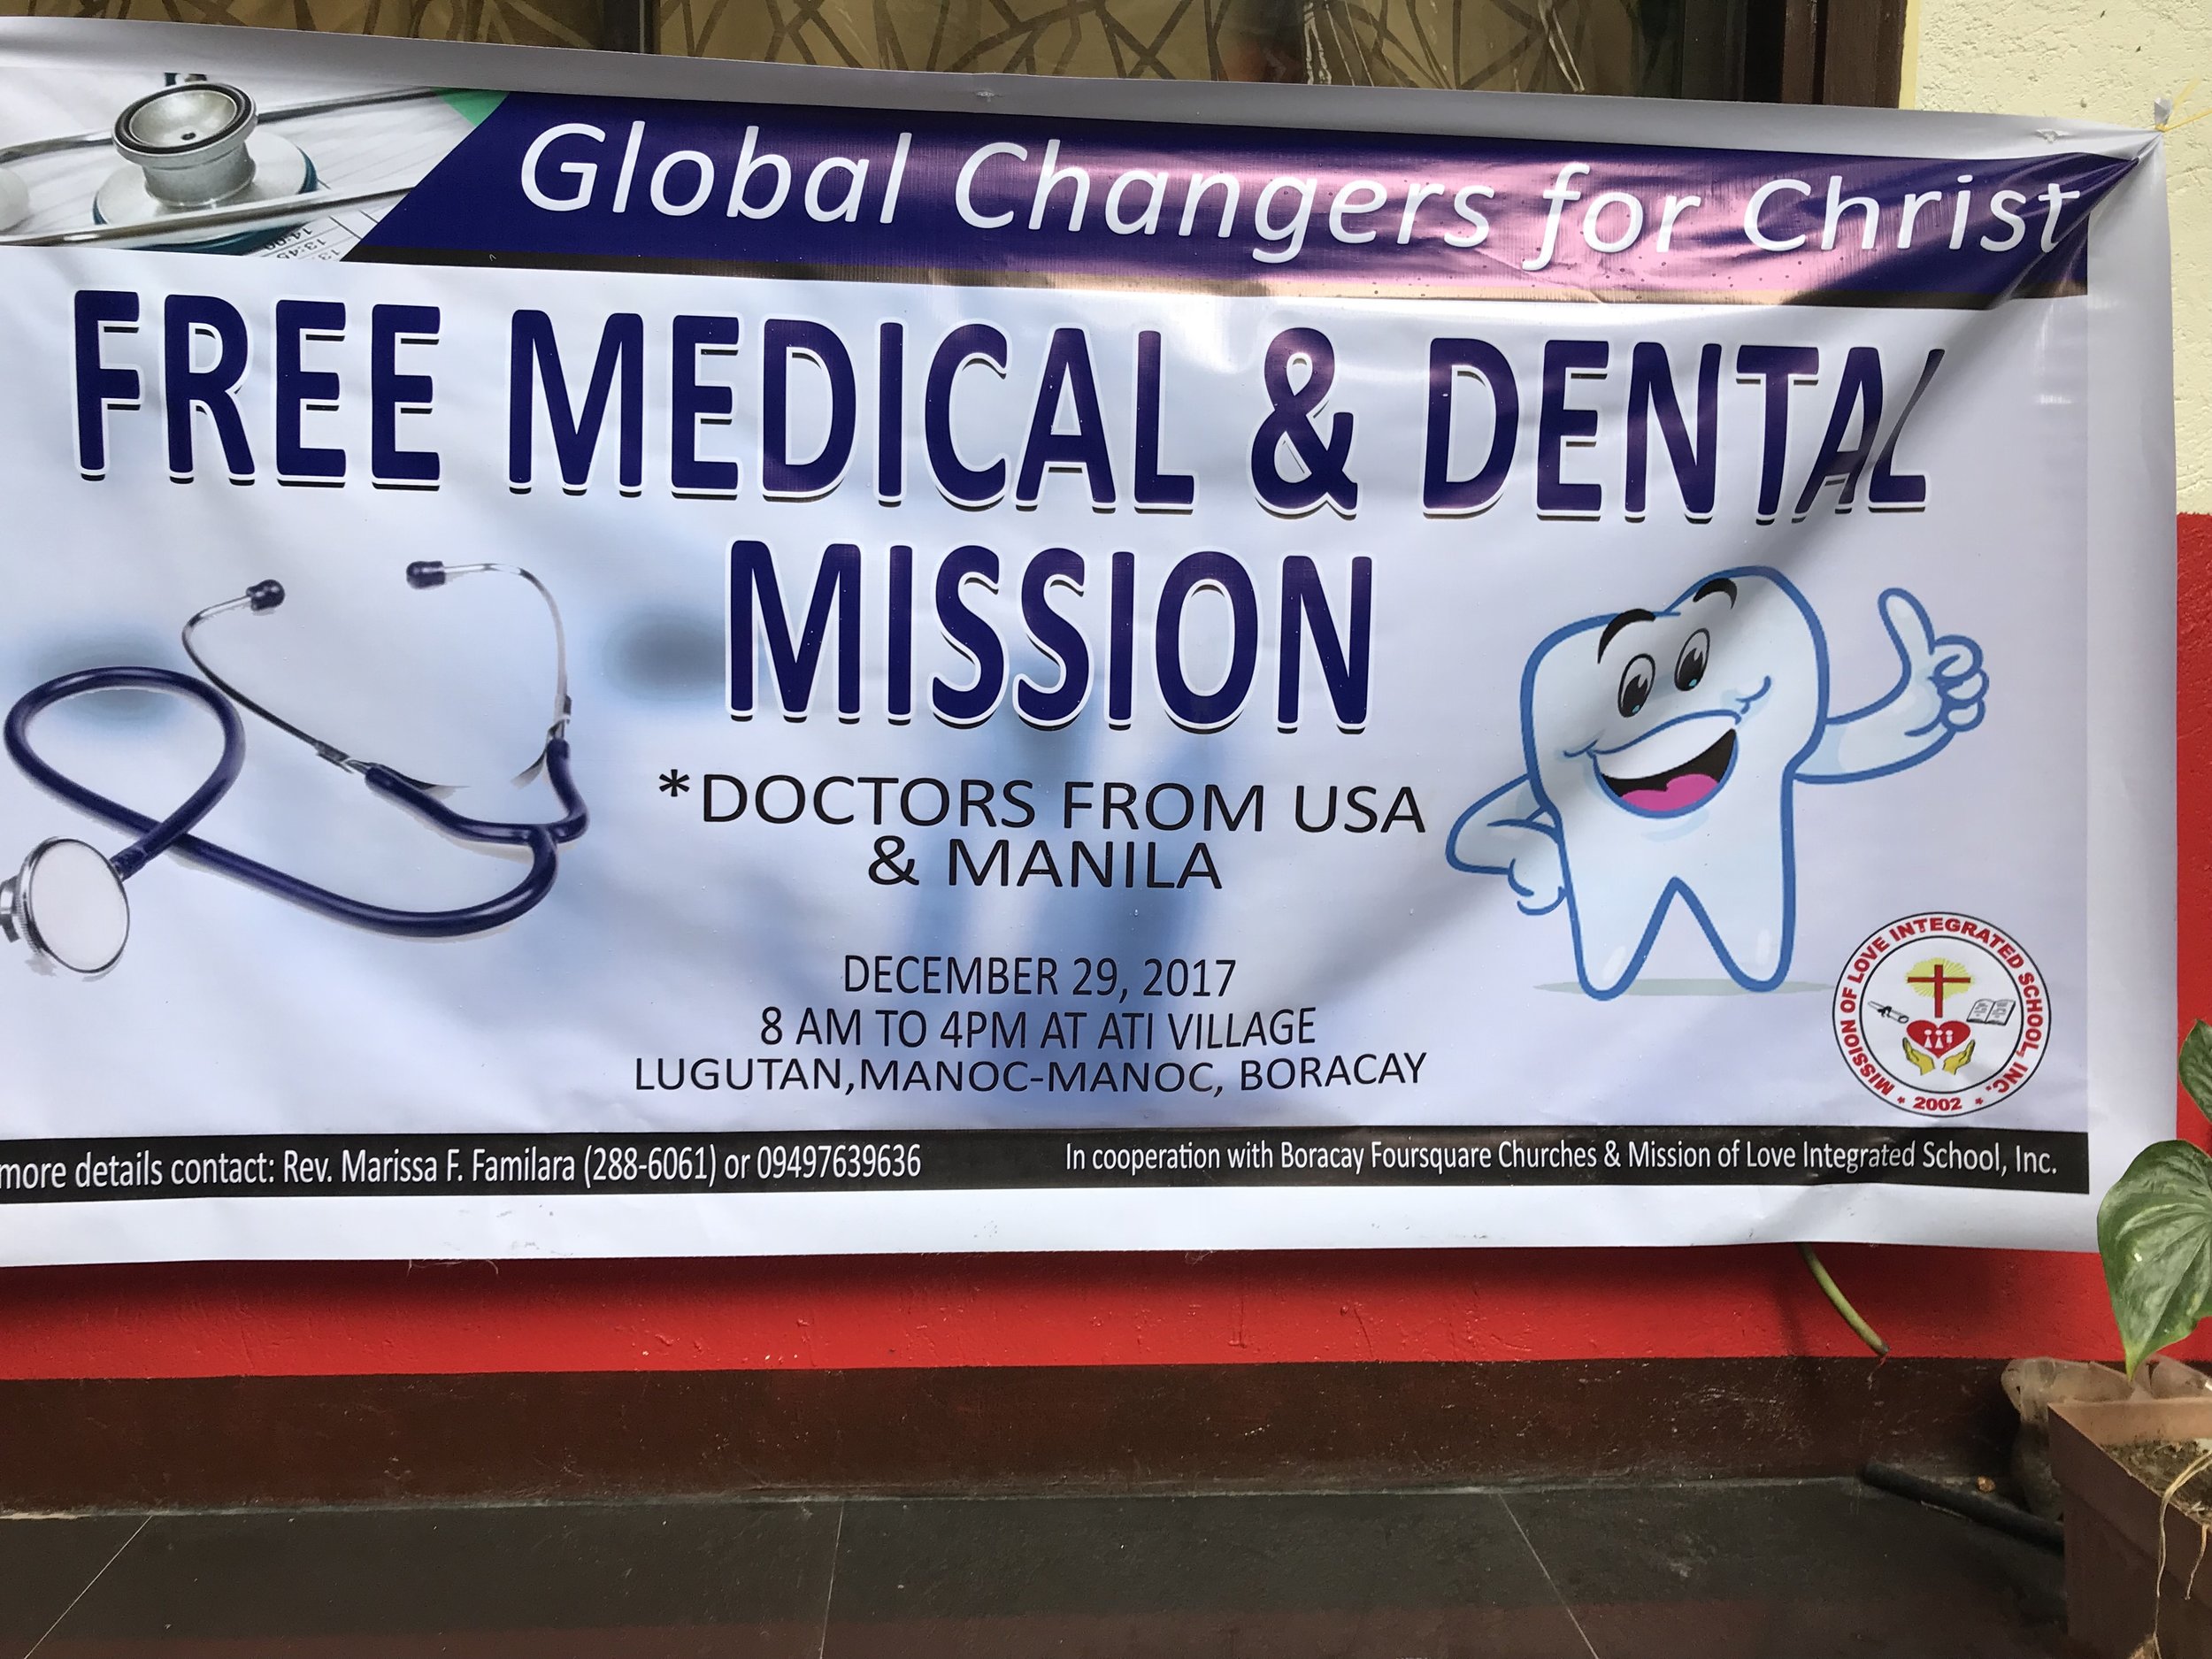  It was the vision of Grace Santos-Stutz to bring over fifty members of her family to their Philippine homeland to conduct a free medical and dental clinic to the Ati Village in Boracay, Philippines last December 